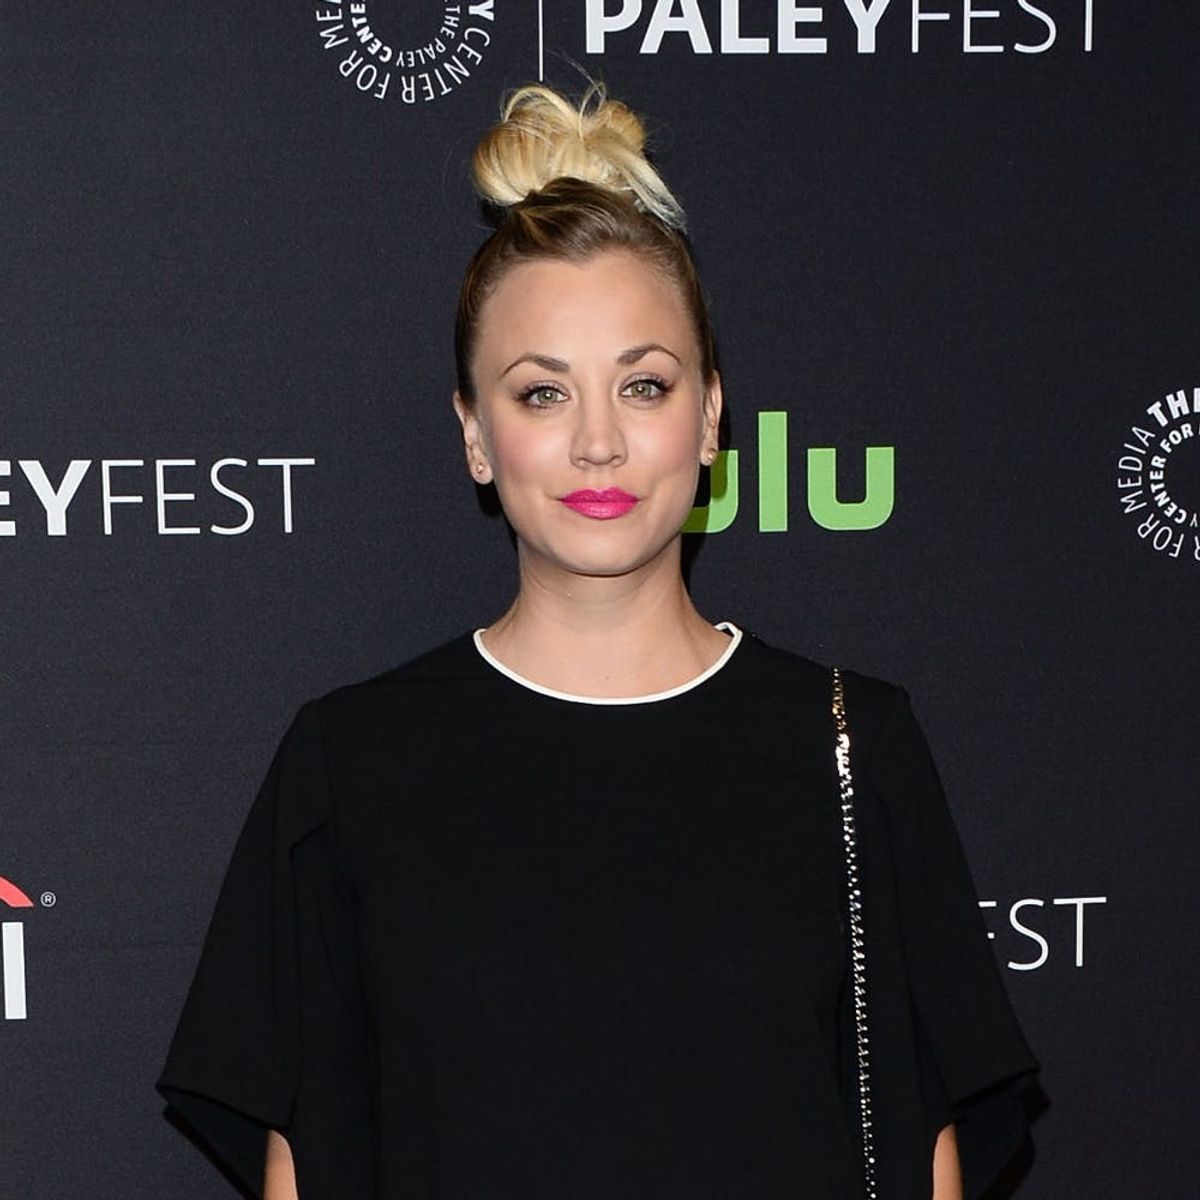 Kaley Cuoco Speaks Out Against the Cincinnati Zoo Gorilla Tragedy